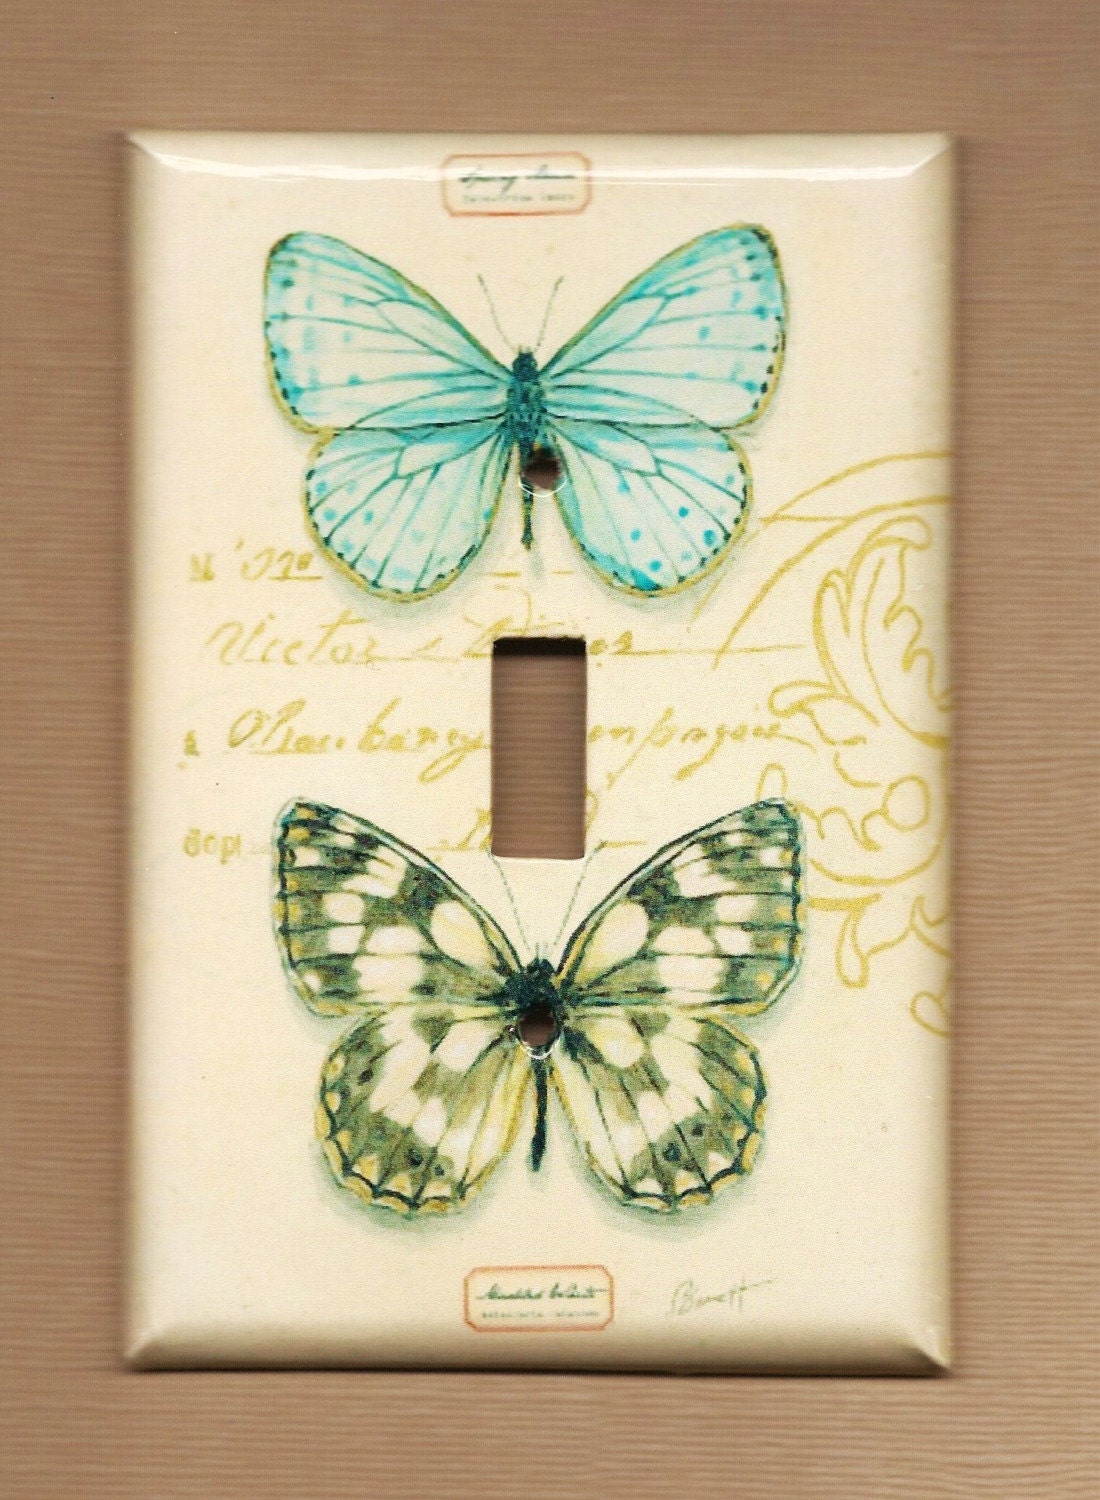 Butterflies are Forever Switch Plate cover